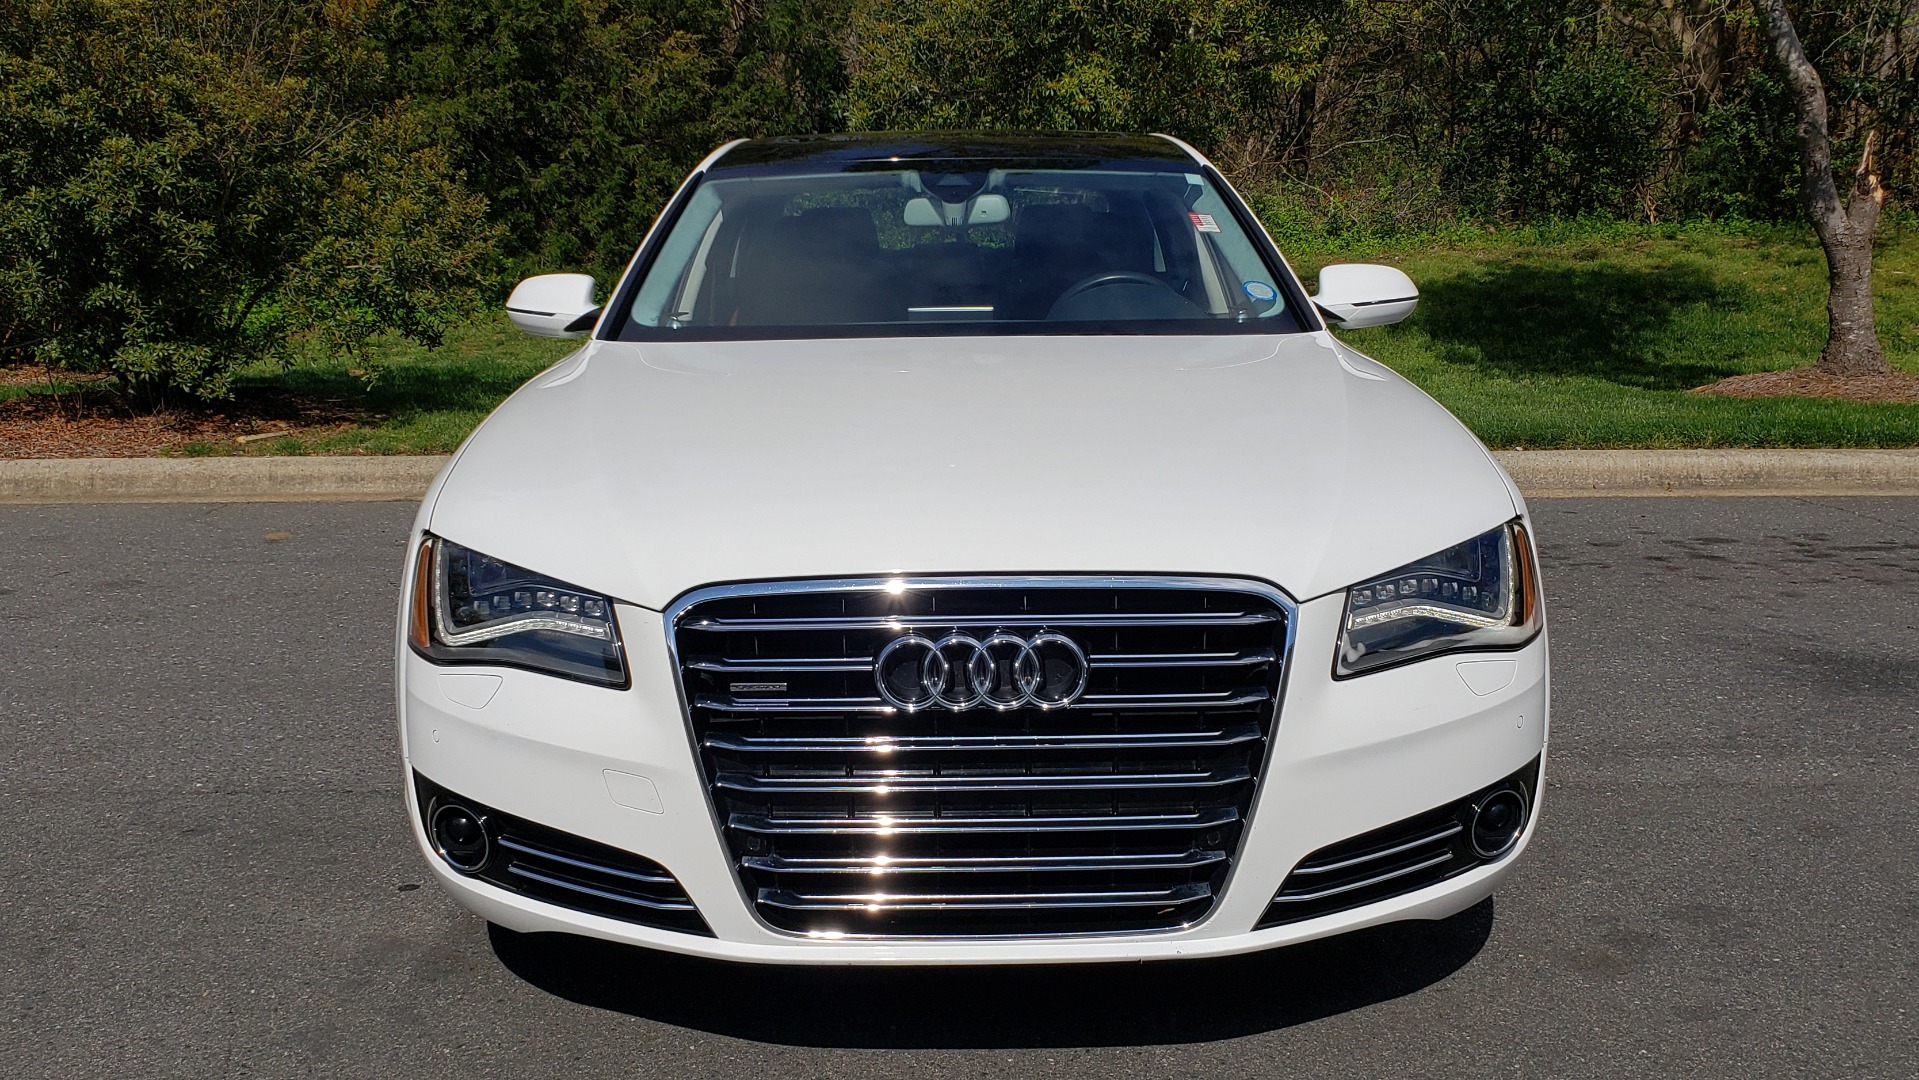 Used 2011 Audi A8 L QUATTRO / NAV / PANO-ROOF / REARVIEW / BSM / B&O SND for sale Sold at Formula Imports in Charlotte NC 28227 21